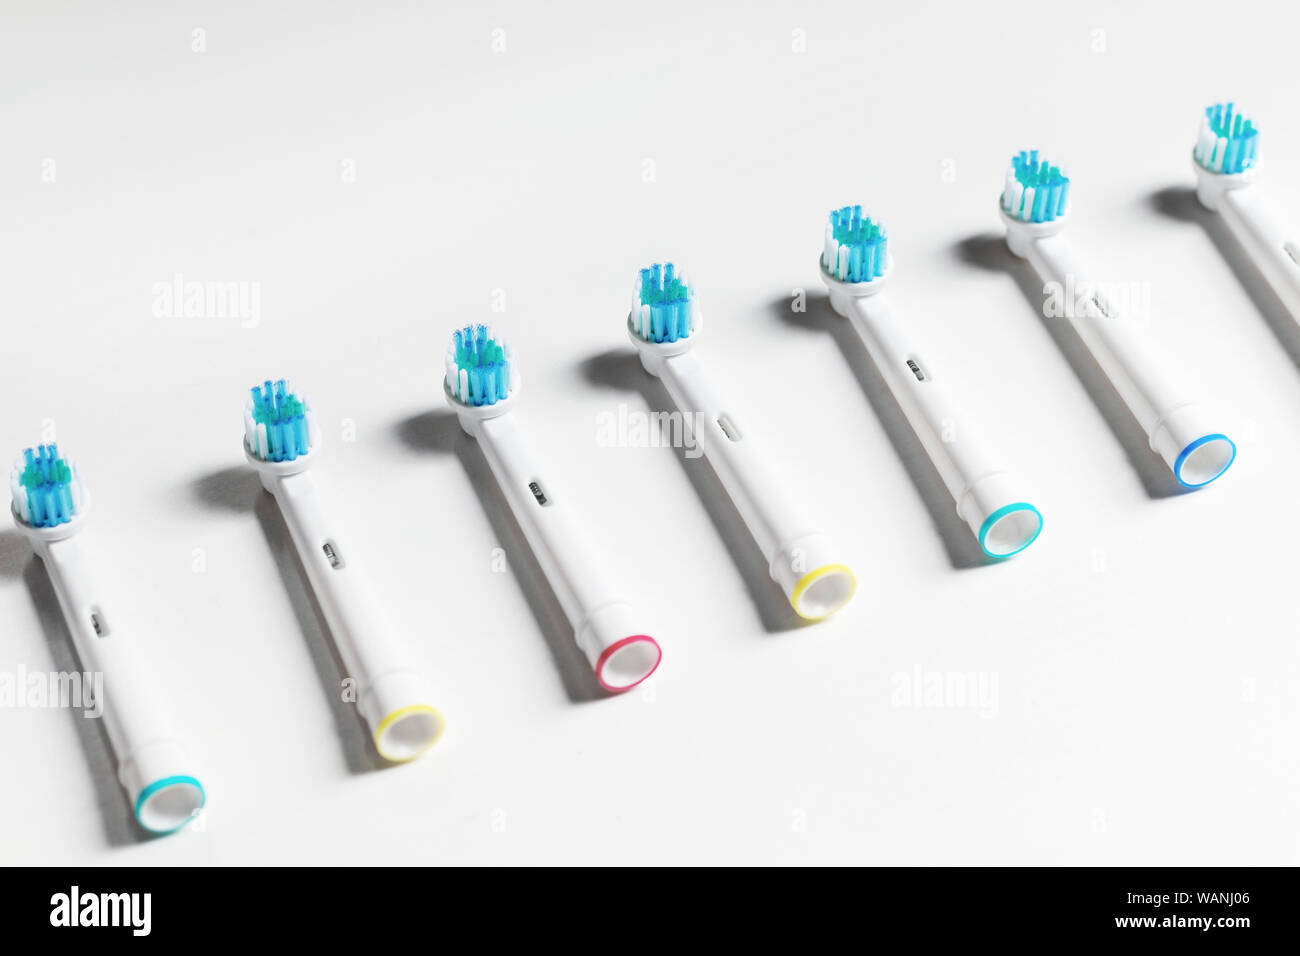 Row of toothbrush heads isolated on a white background, with a shallow depth of field Stock Photo